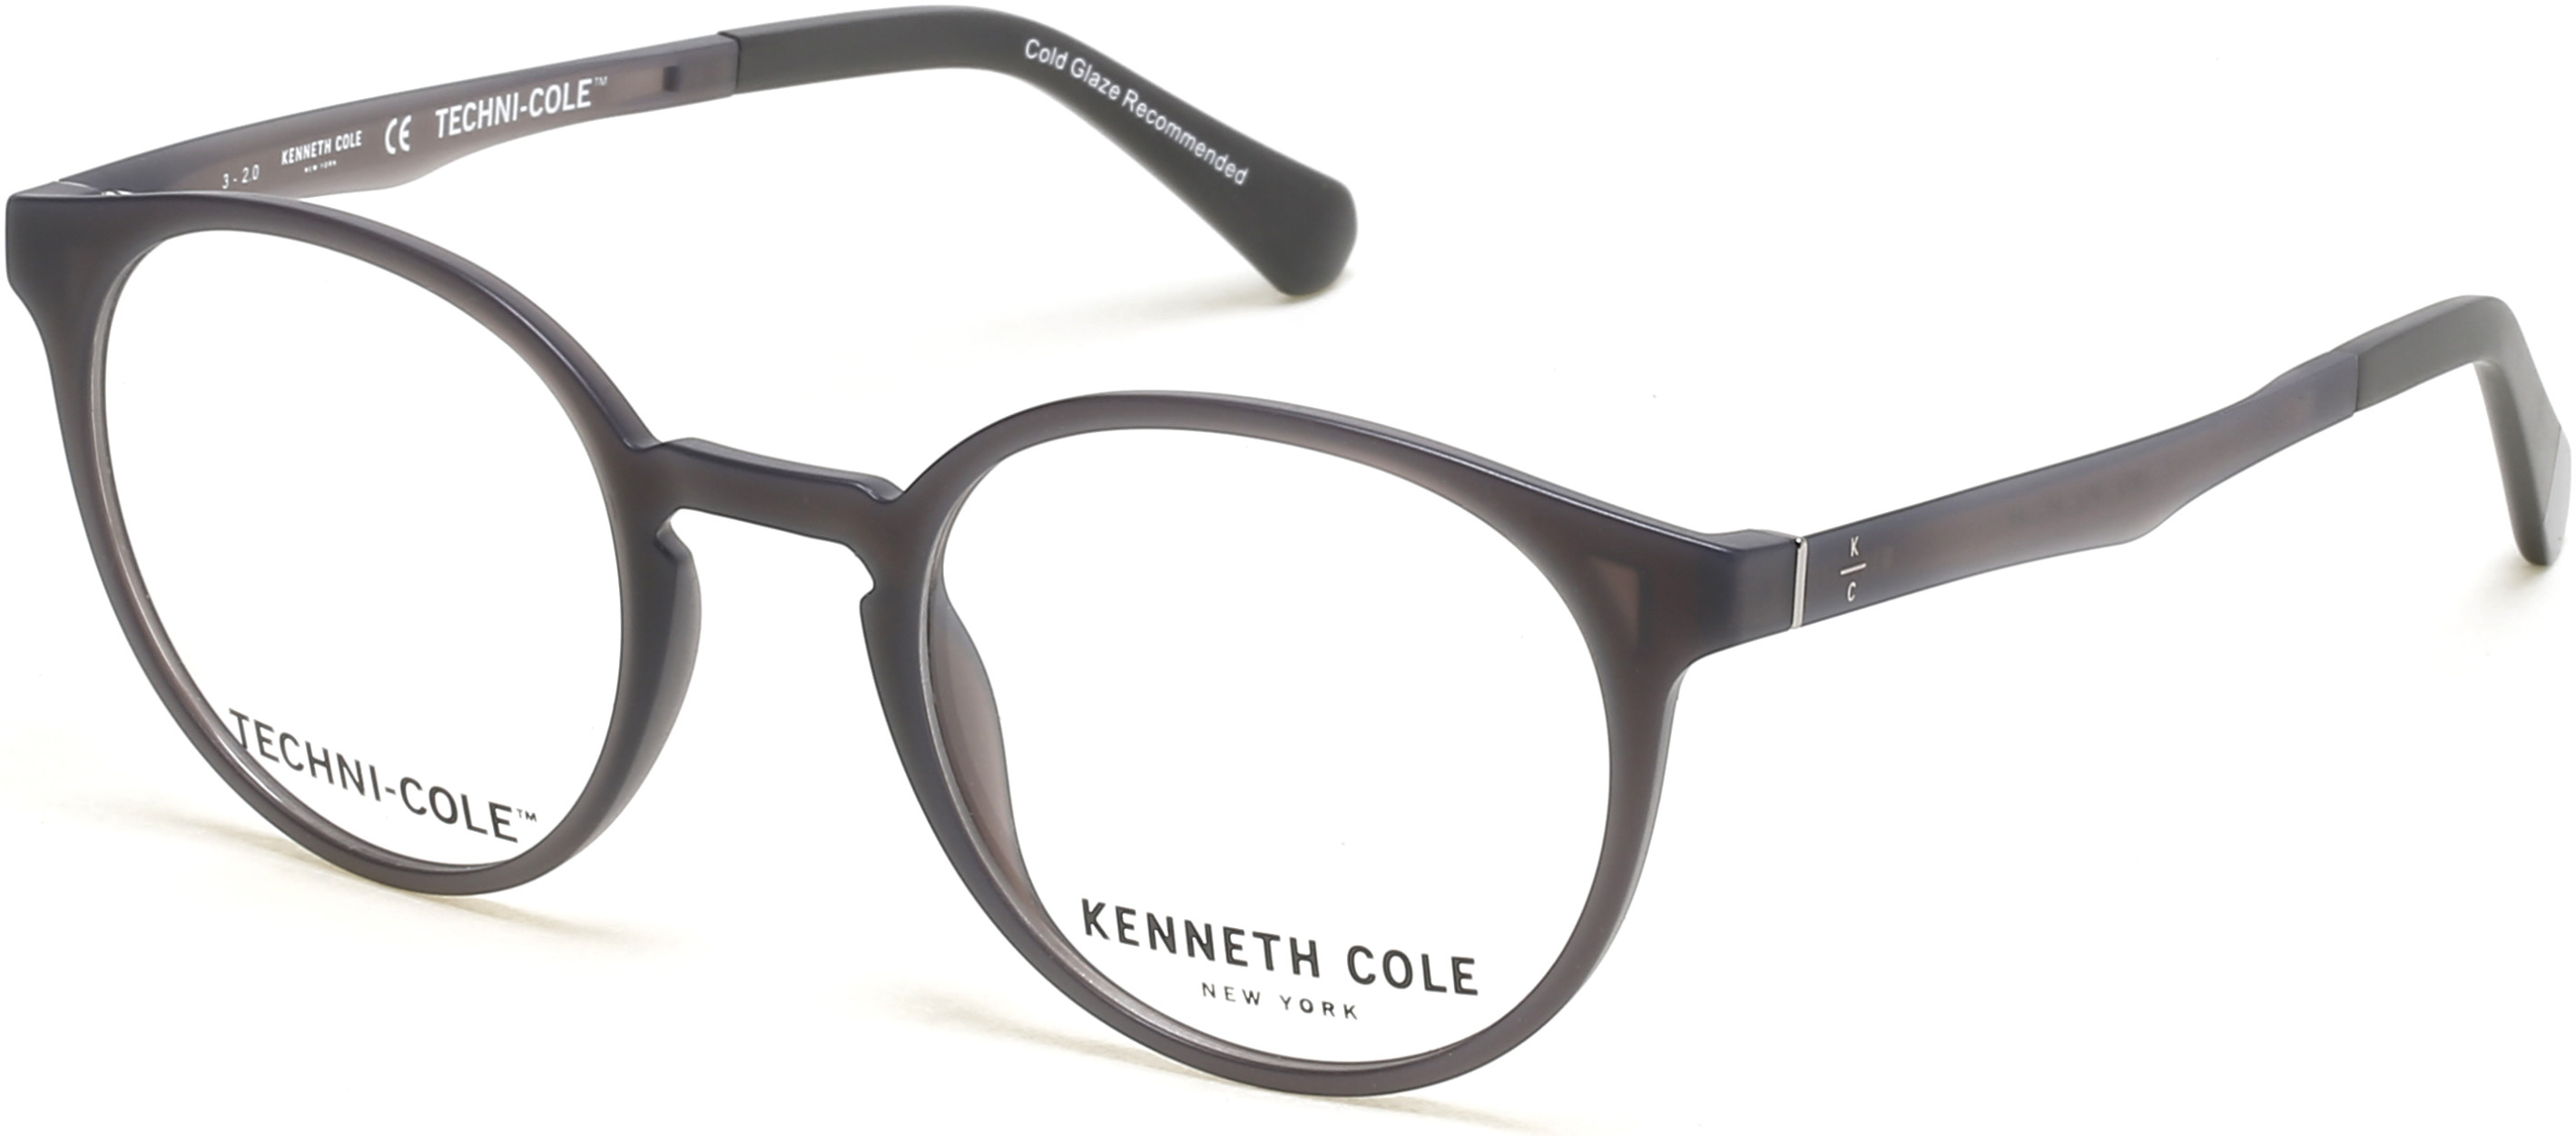 KENNETH COLE NY 0319 020